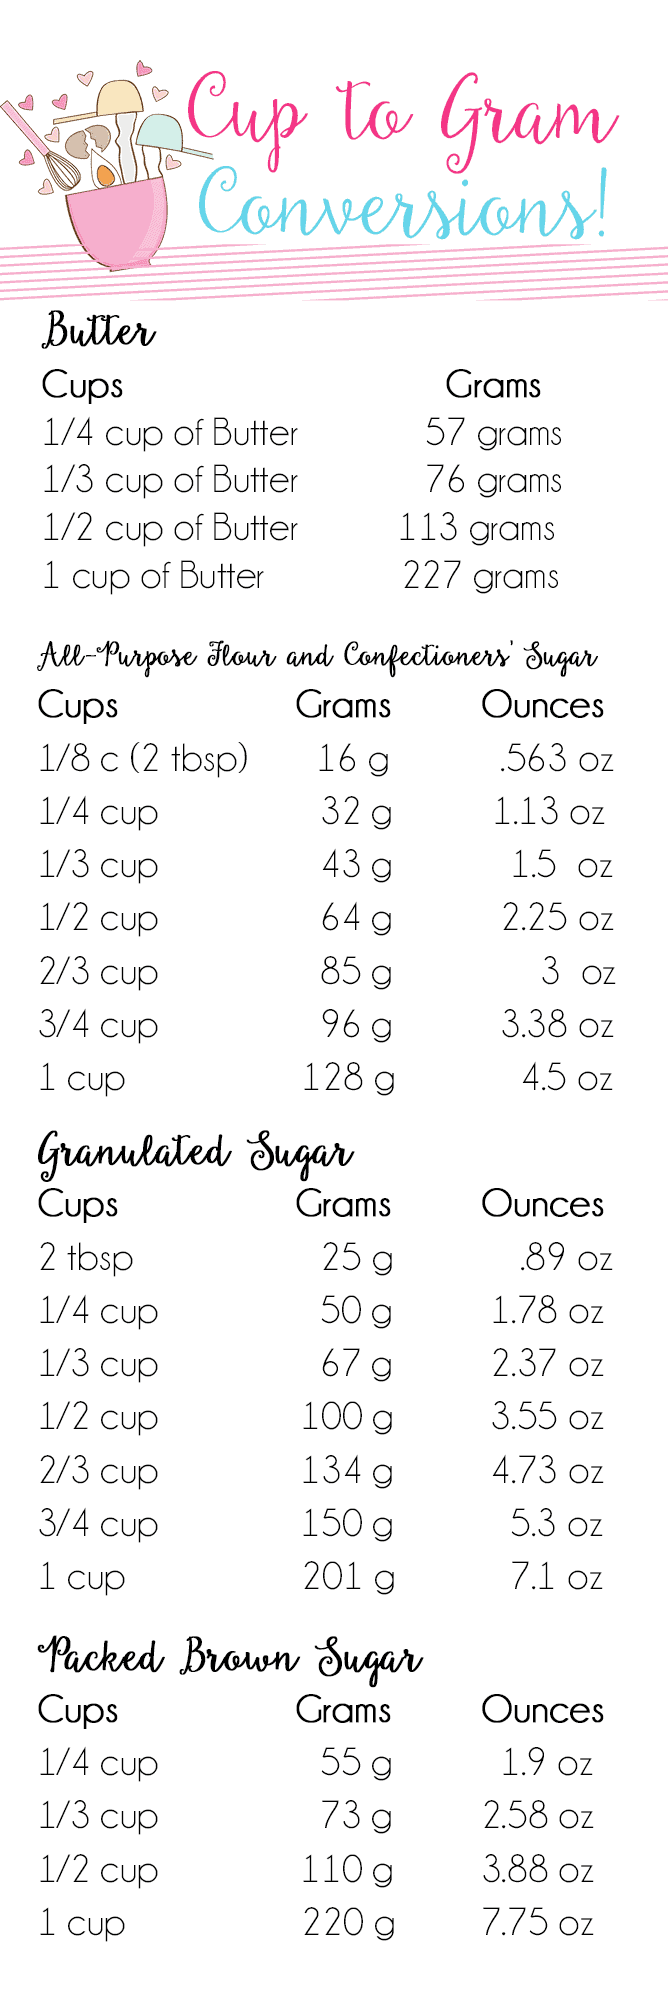 Cups To Grams Conversion Chart - How Many Grams In A Cup?